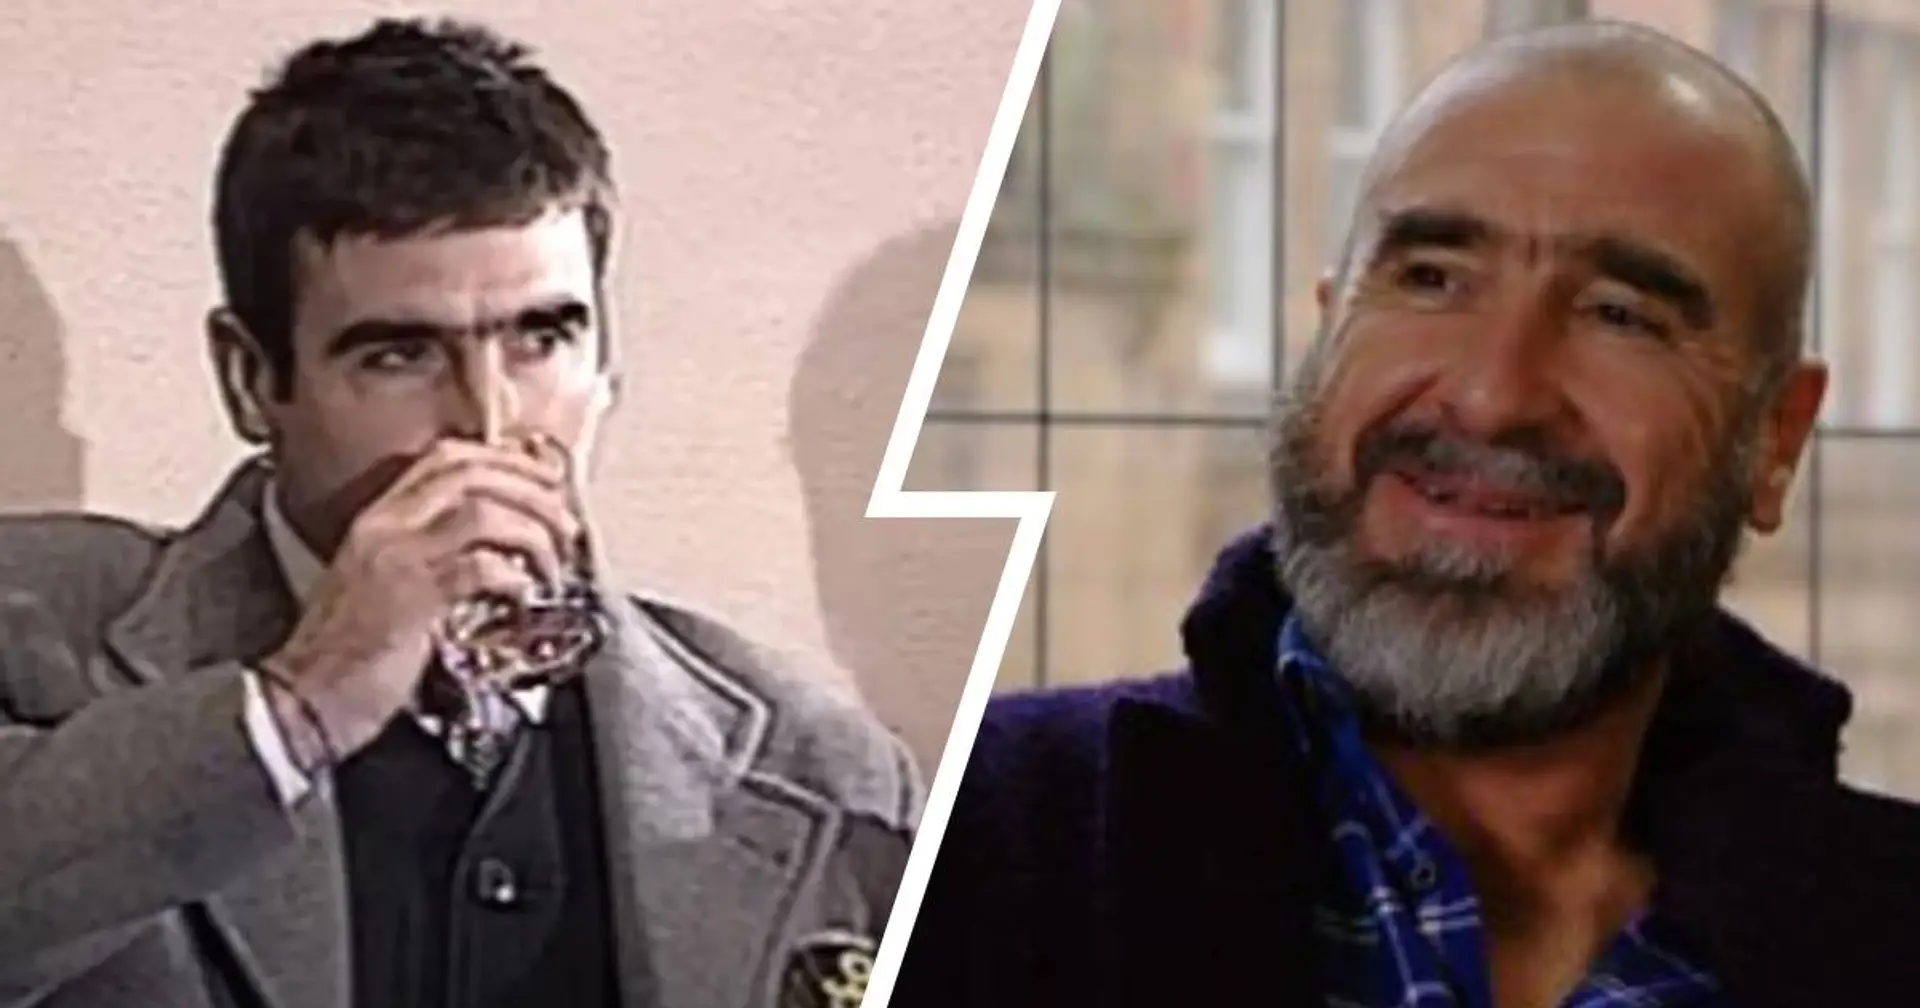 Eric Cantona finally explains his 'seagulls, sardines and trawlers' comment from 30 years ago